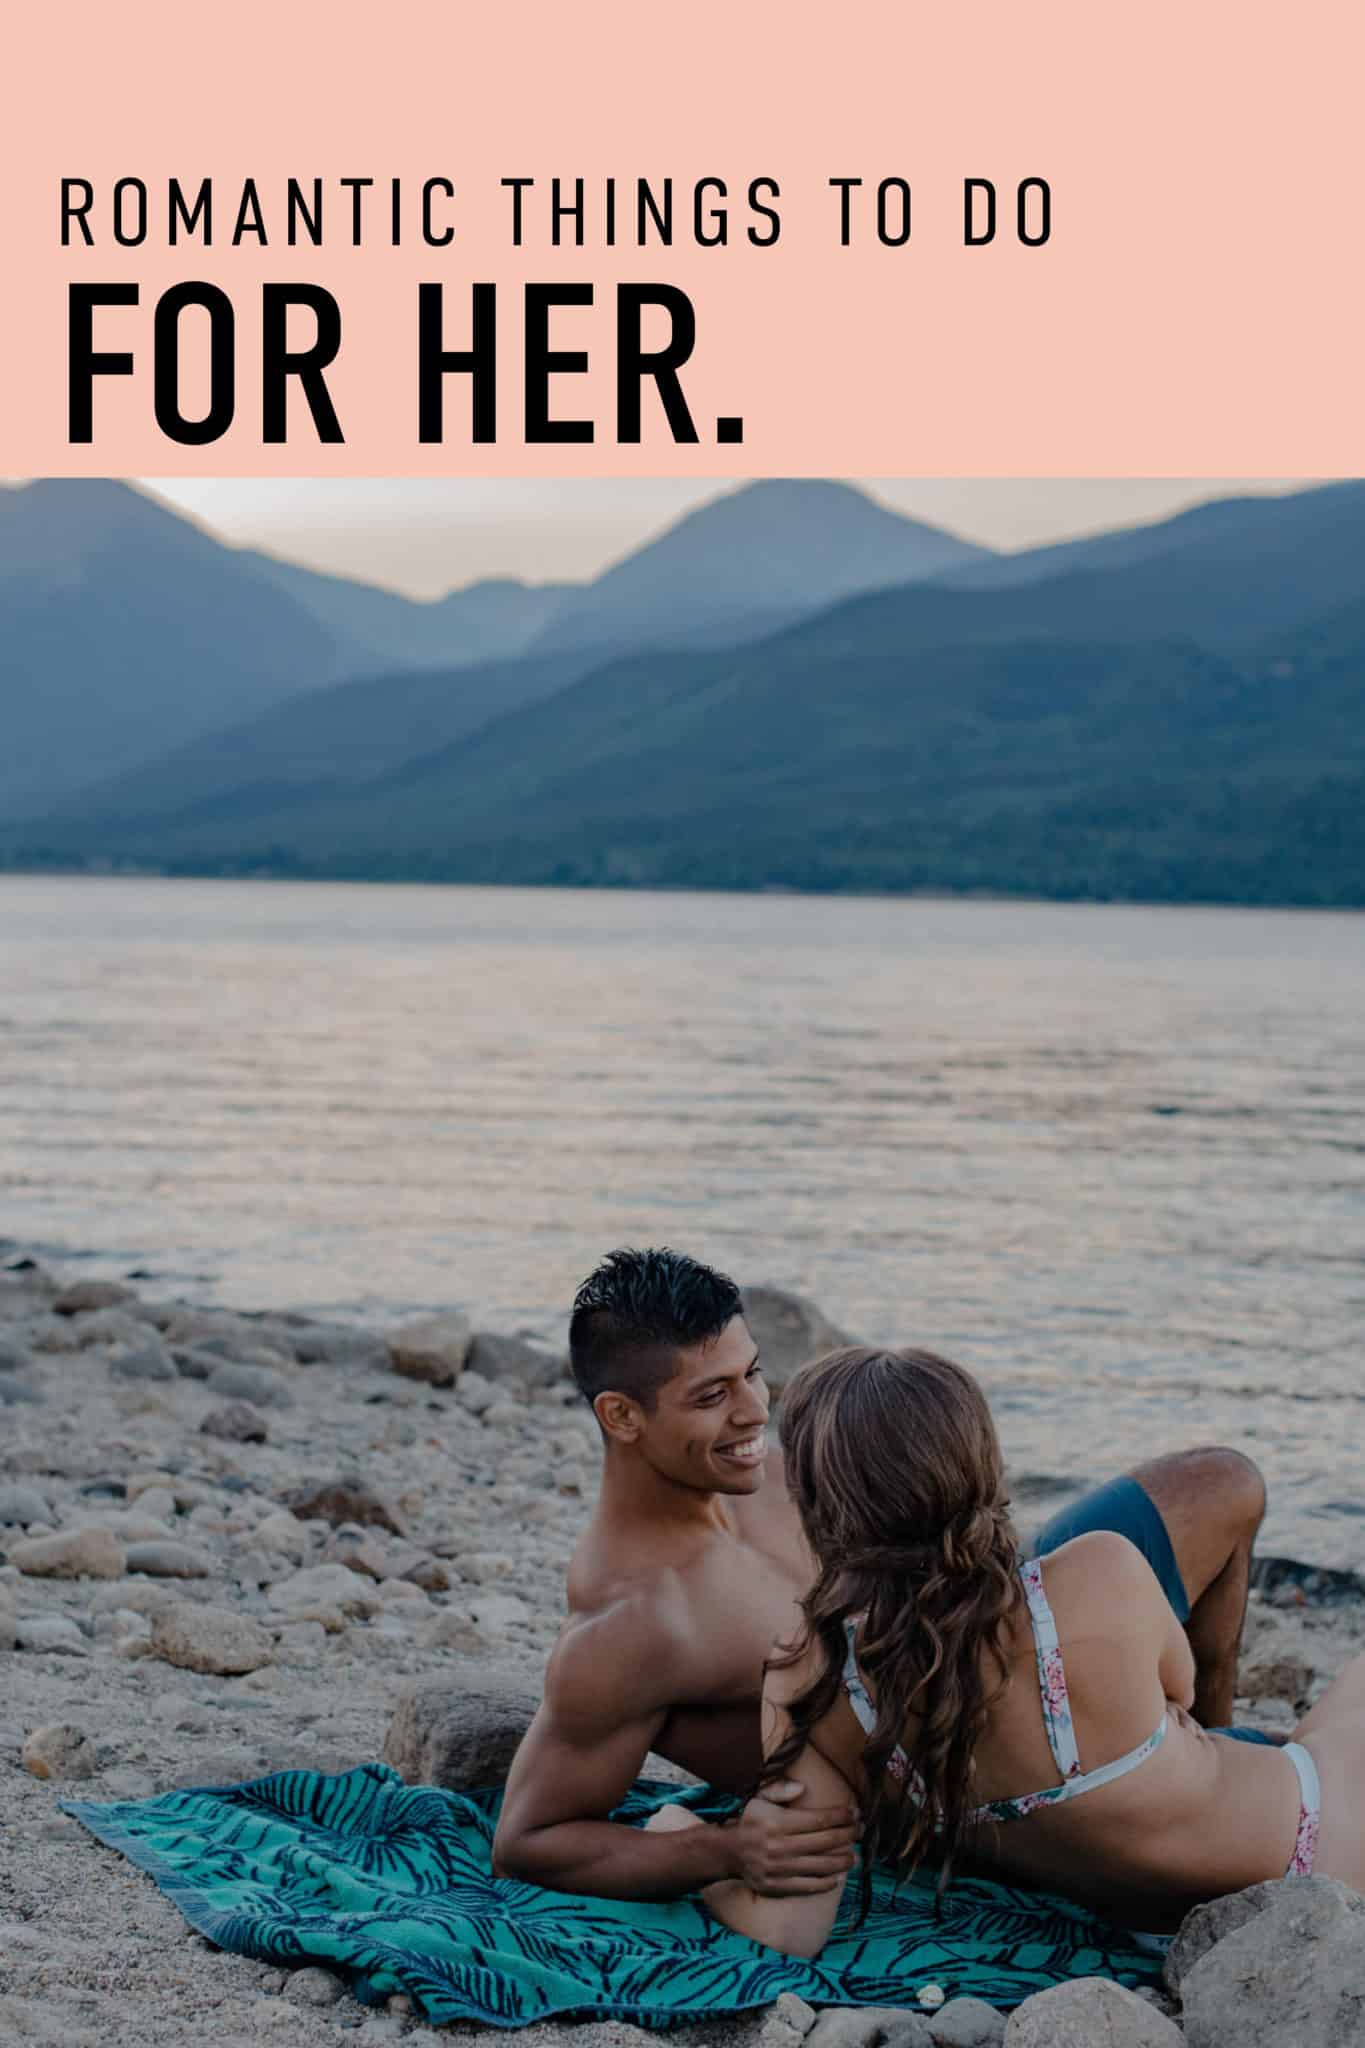 "romantic things to do for her couple snuggling on the beach of an alpine lake